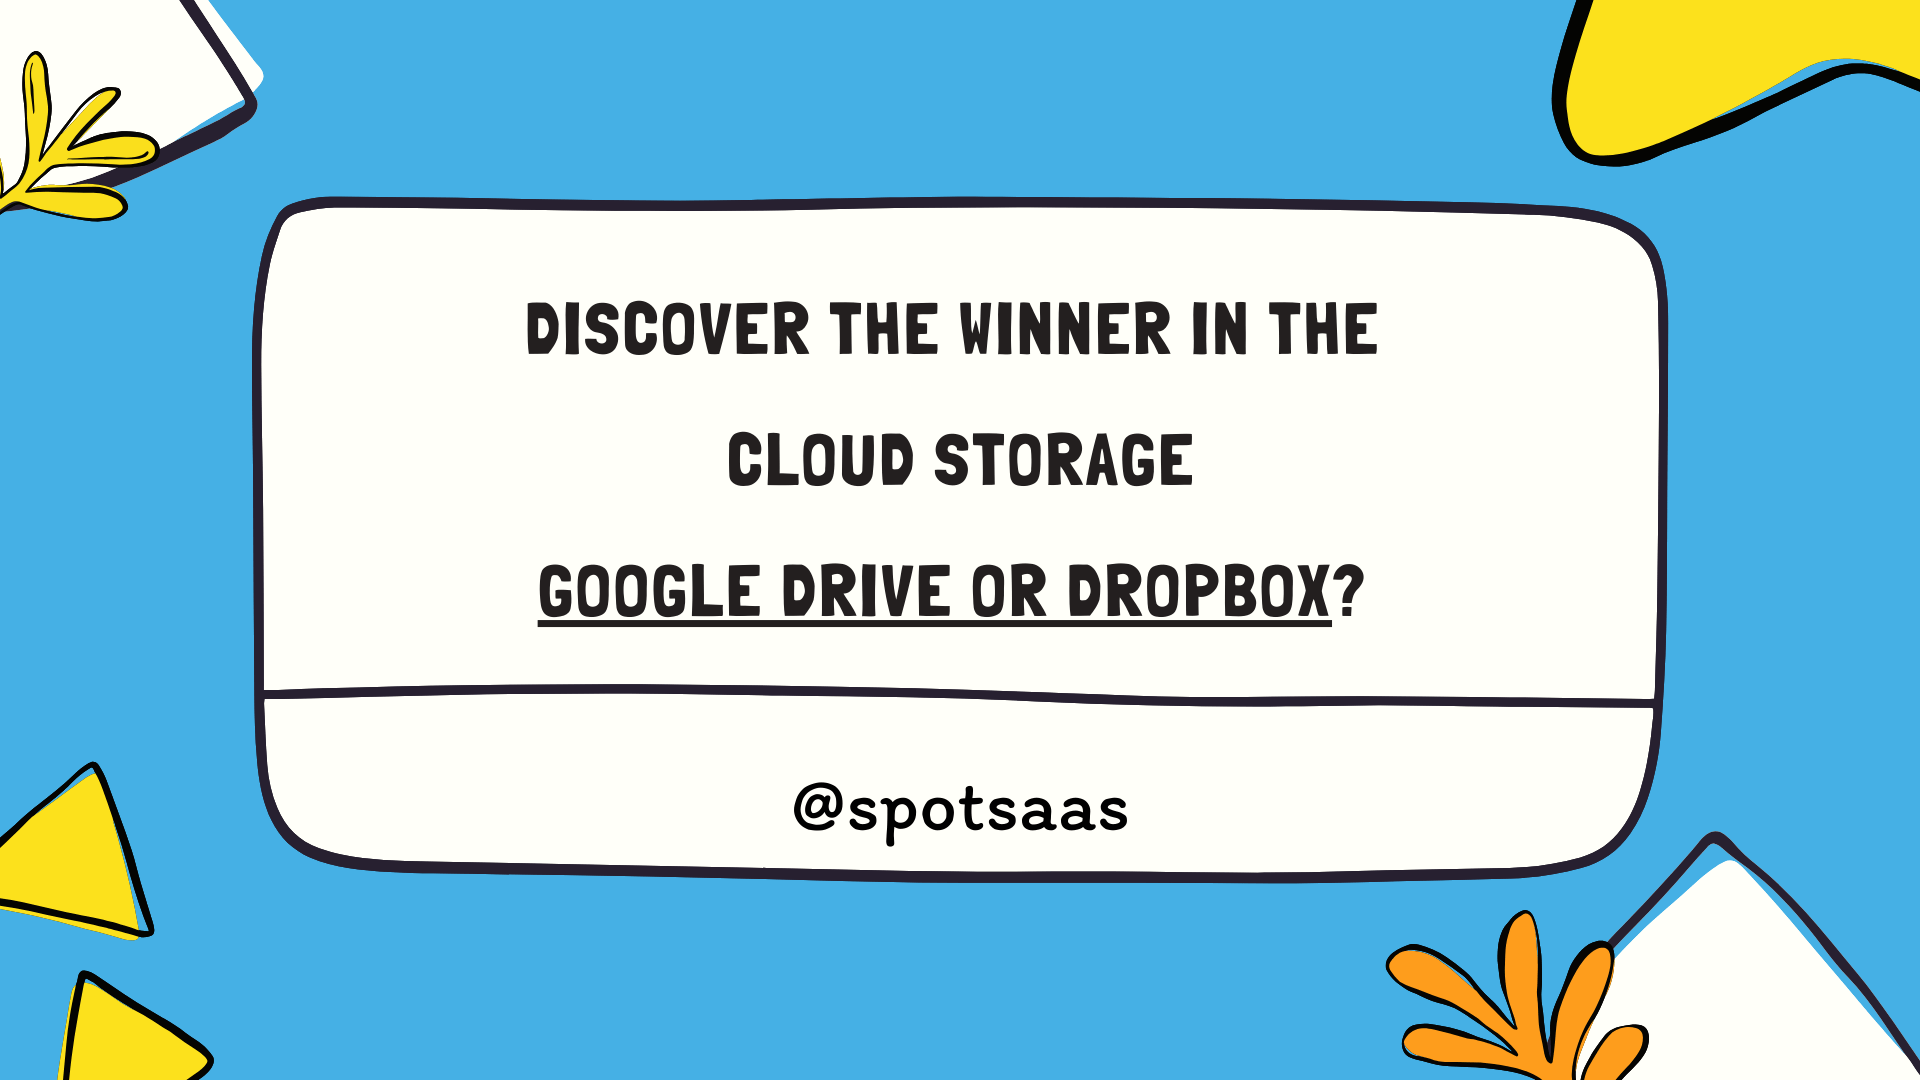 Discover the Winner in the Cloud Storage: Google Drive or Dropbox?